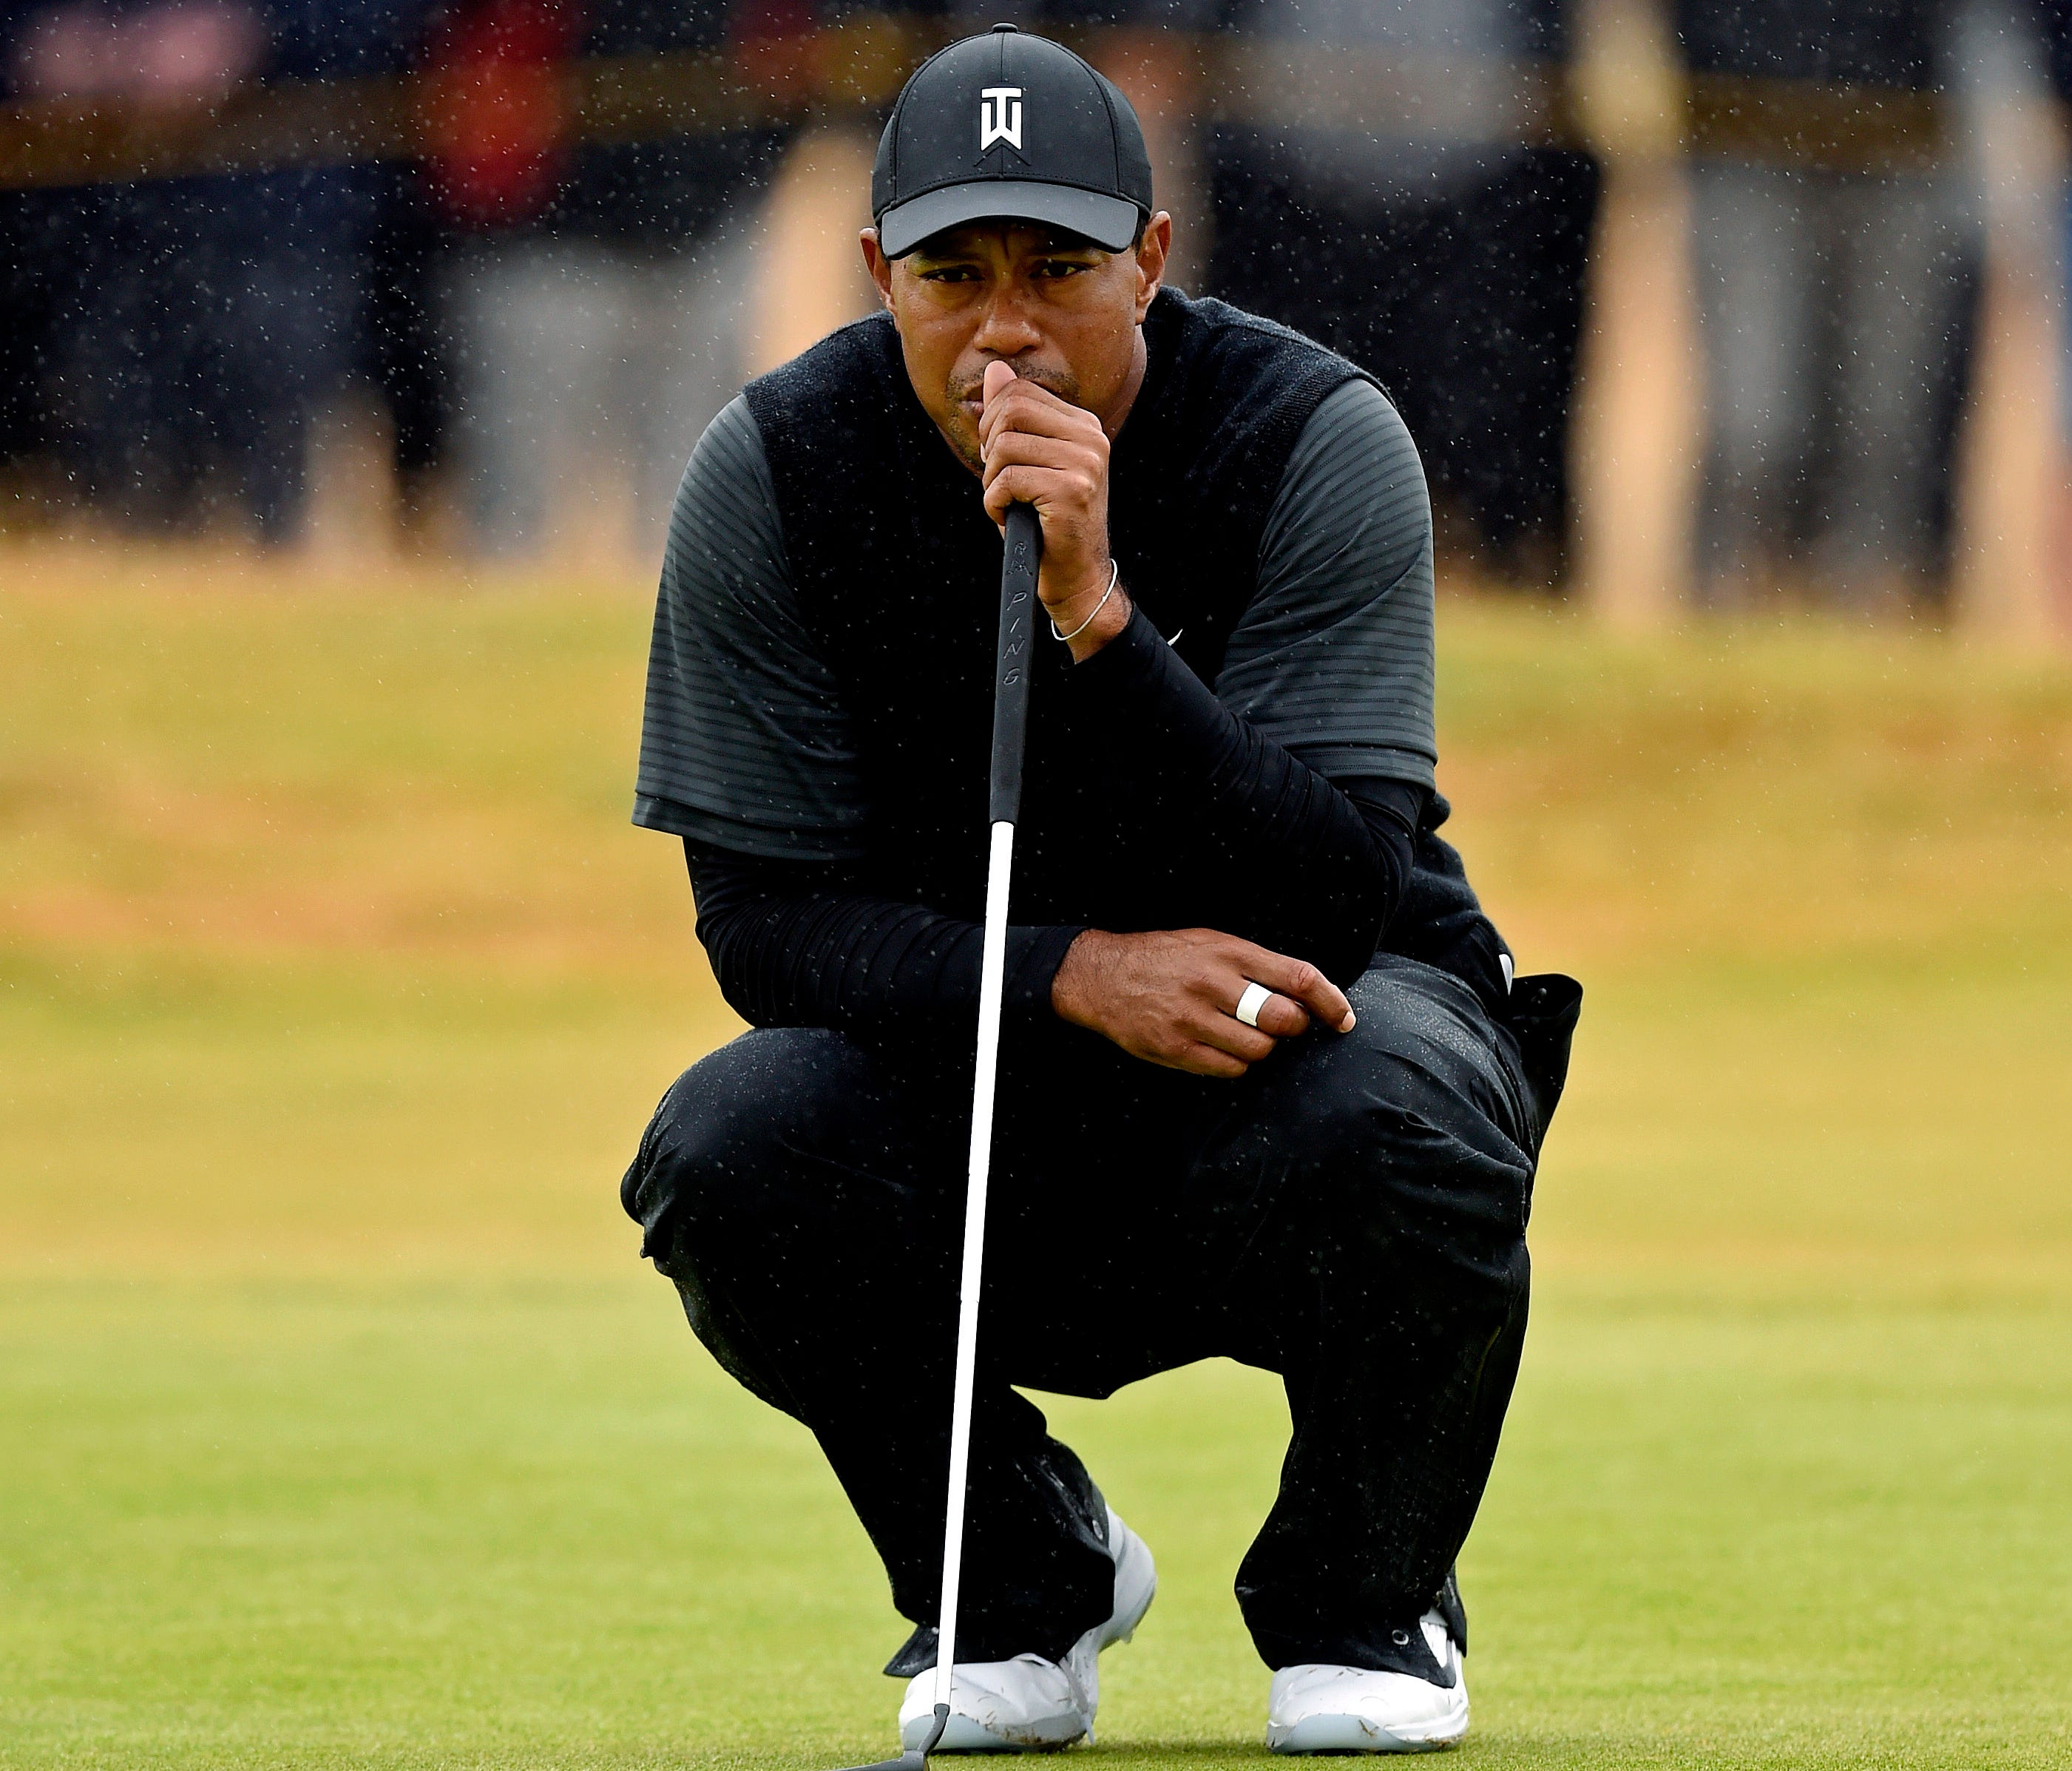 Tiger Woods lines up his putt on the fourth green during the second round of The Open Championship golf tournament at Carnoustie Golf Links.